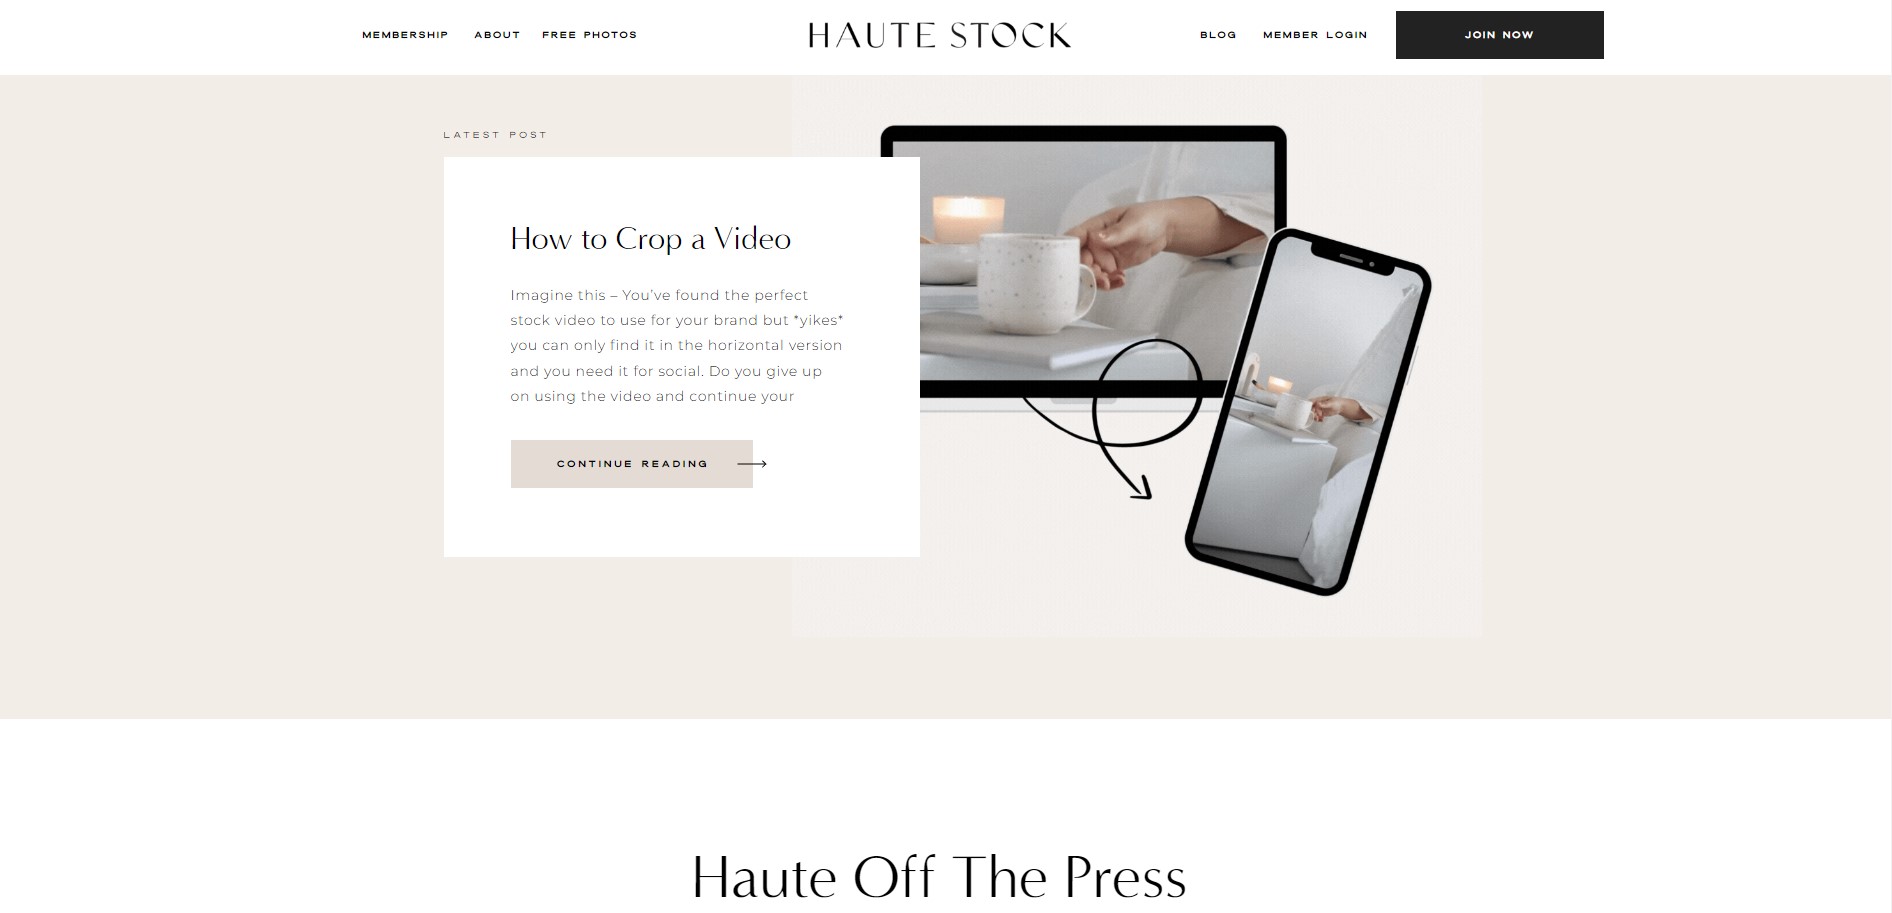 Haute Stock using color champaign in their branding